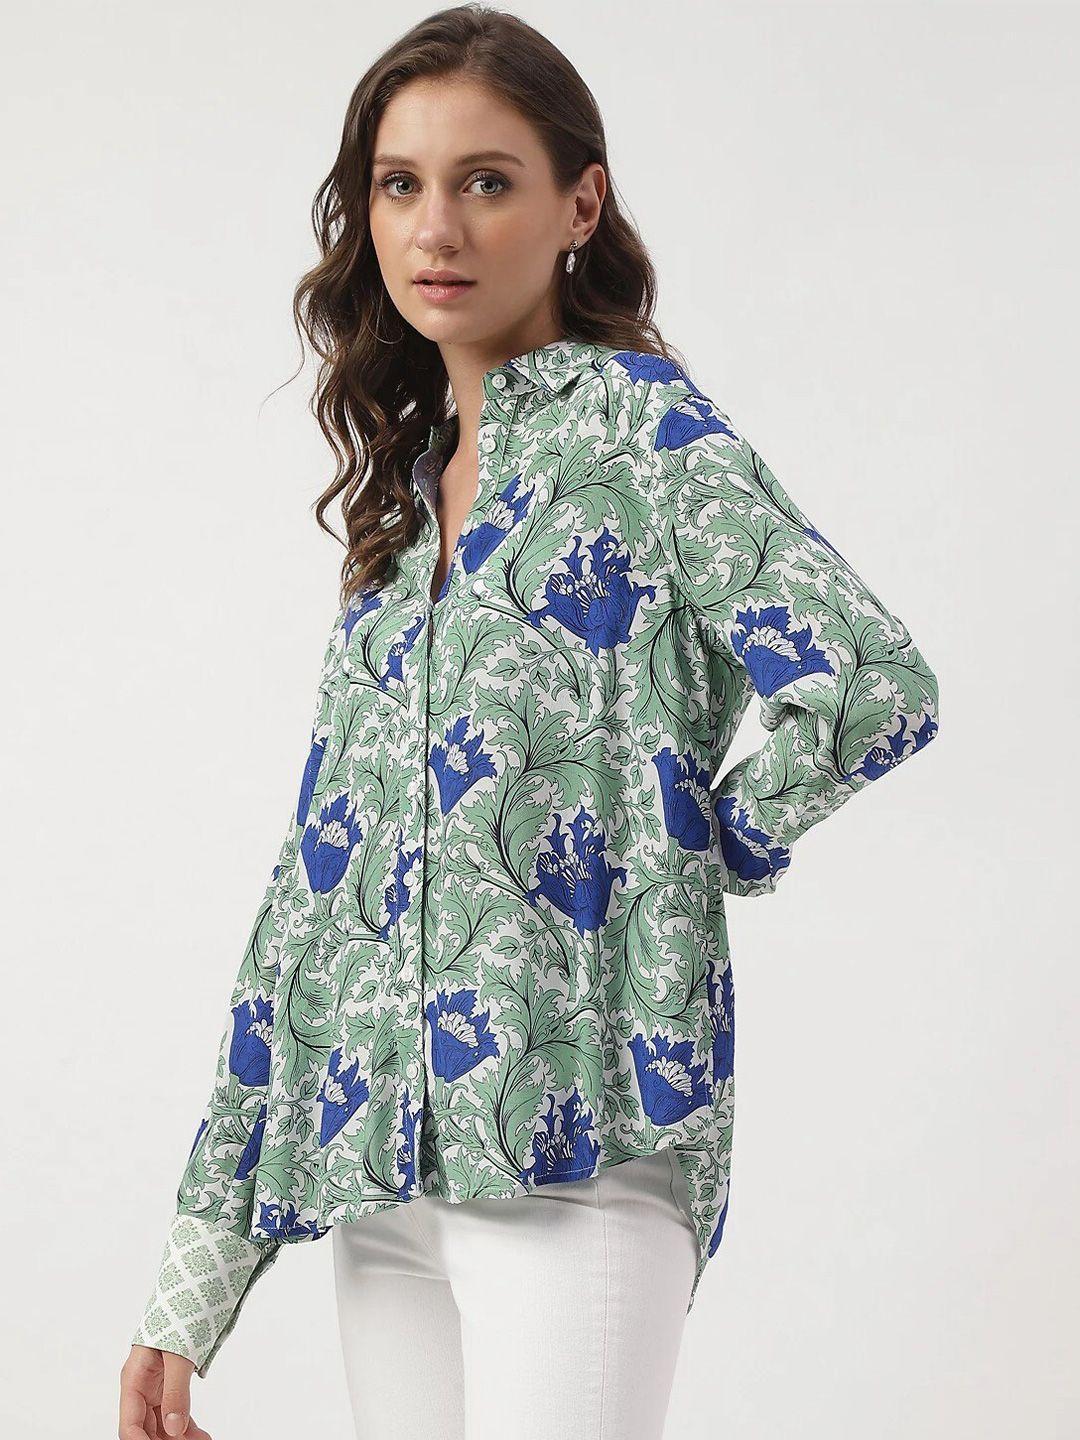 marks-&-spencer-floral-printed-casual-shirt